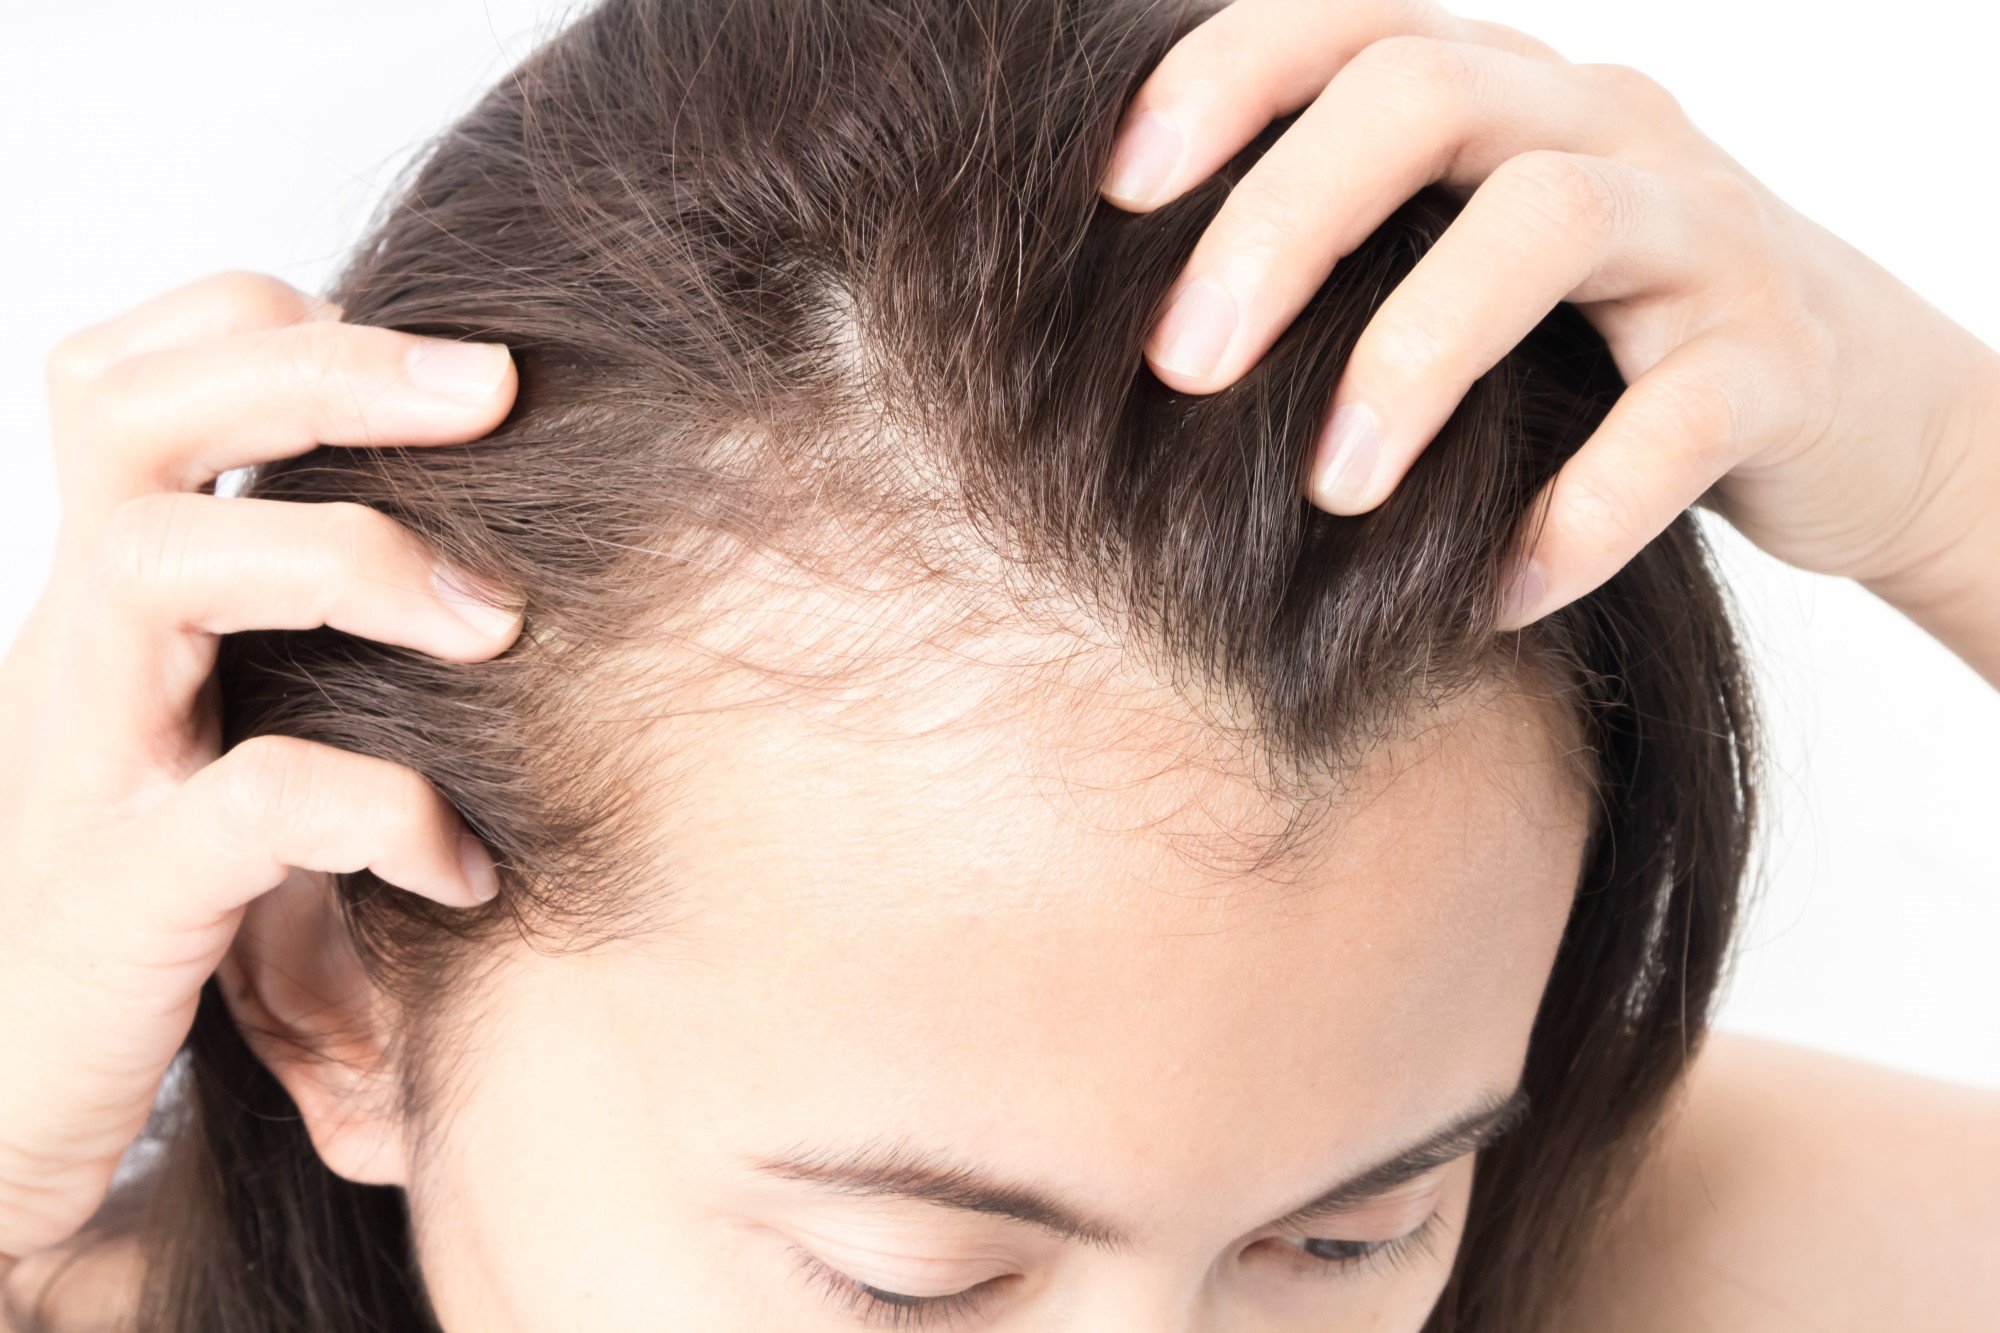 B12 Deficiency and Hair Loss: How Are They Related?